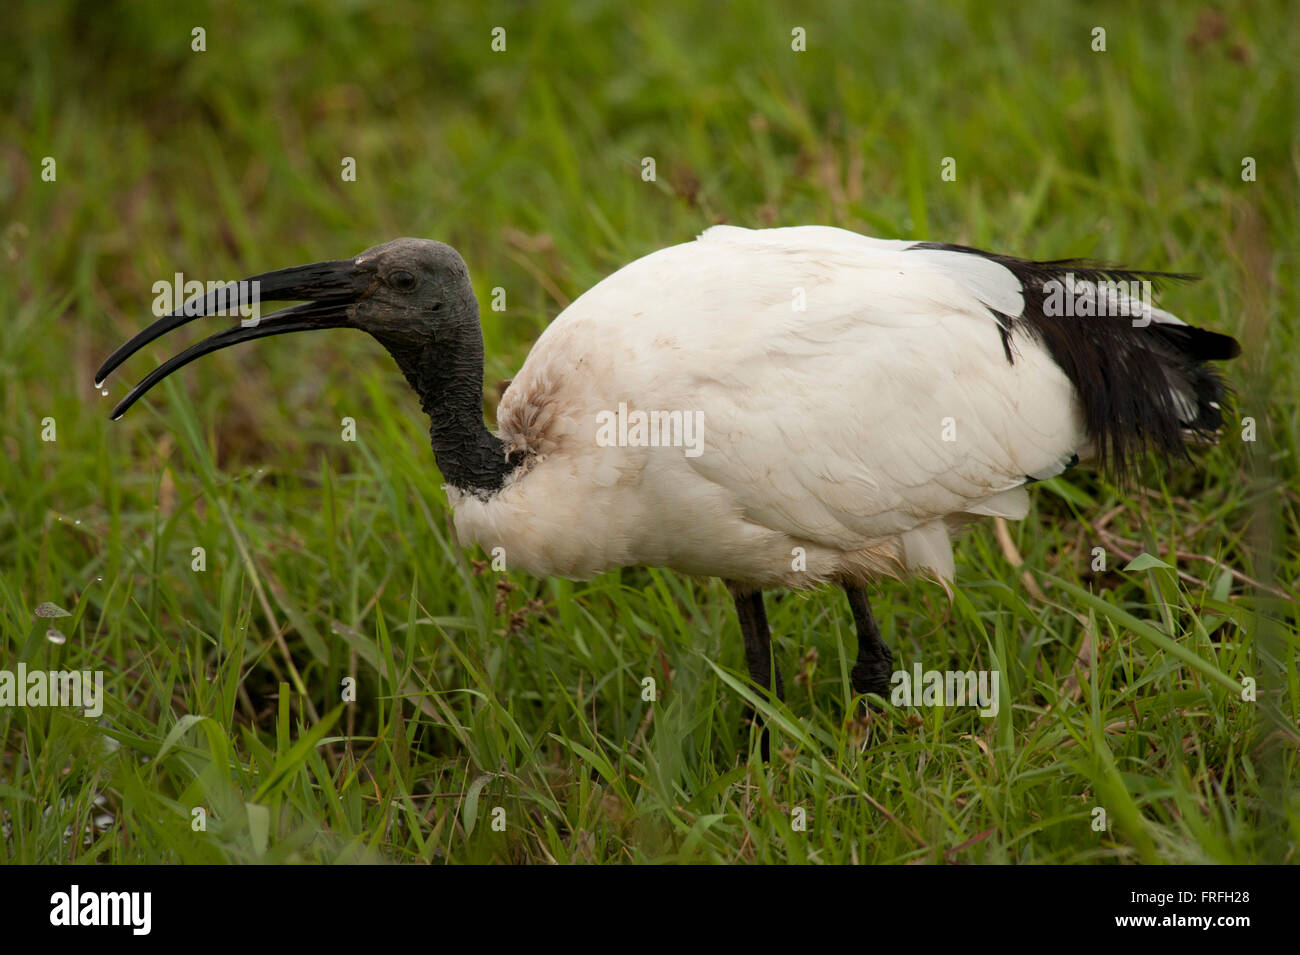 African sacred ibis on the grass in Amboseli National Park Stock Photo